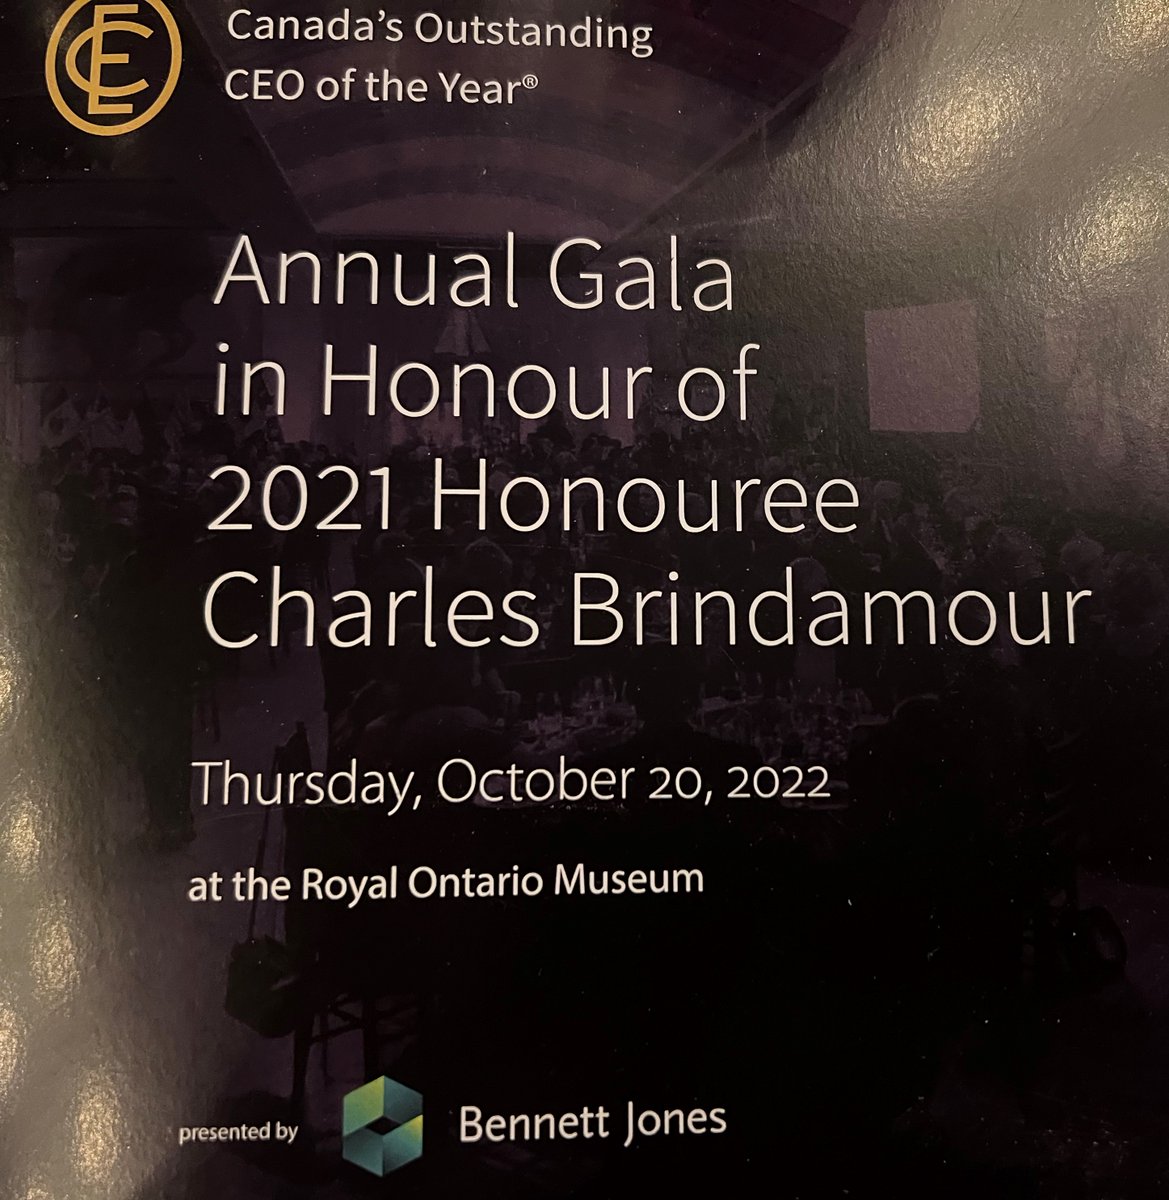 Last night we celebrated the amazing Charles Brindamour as @canadas_ceo of the Year. As the women on Intact’s Board of Directors we could not be prouder. Charles’ remarks reflected his humility, ambition and pride in his team with a great mix of humour. Congratulations Charles.